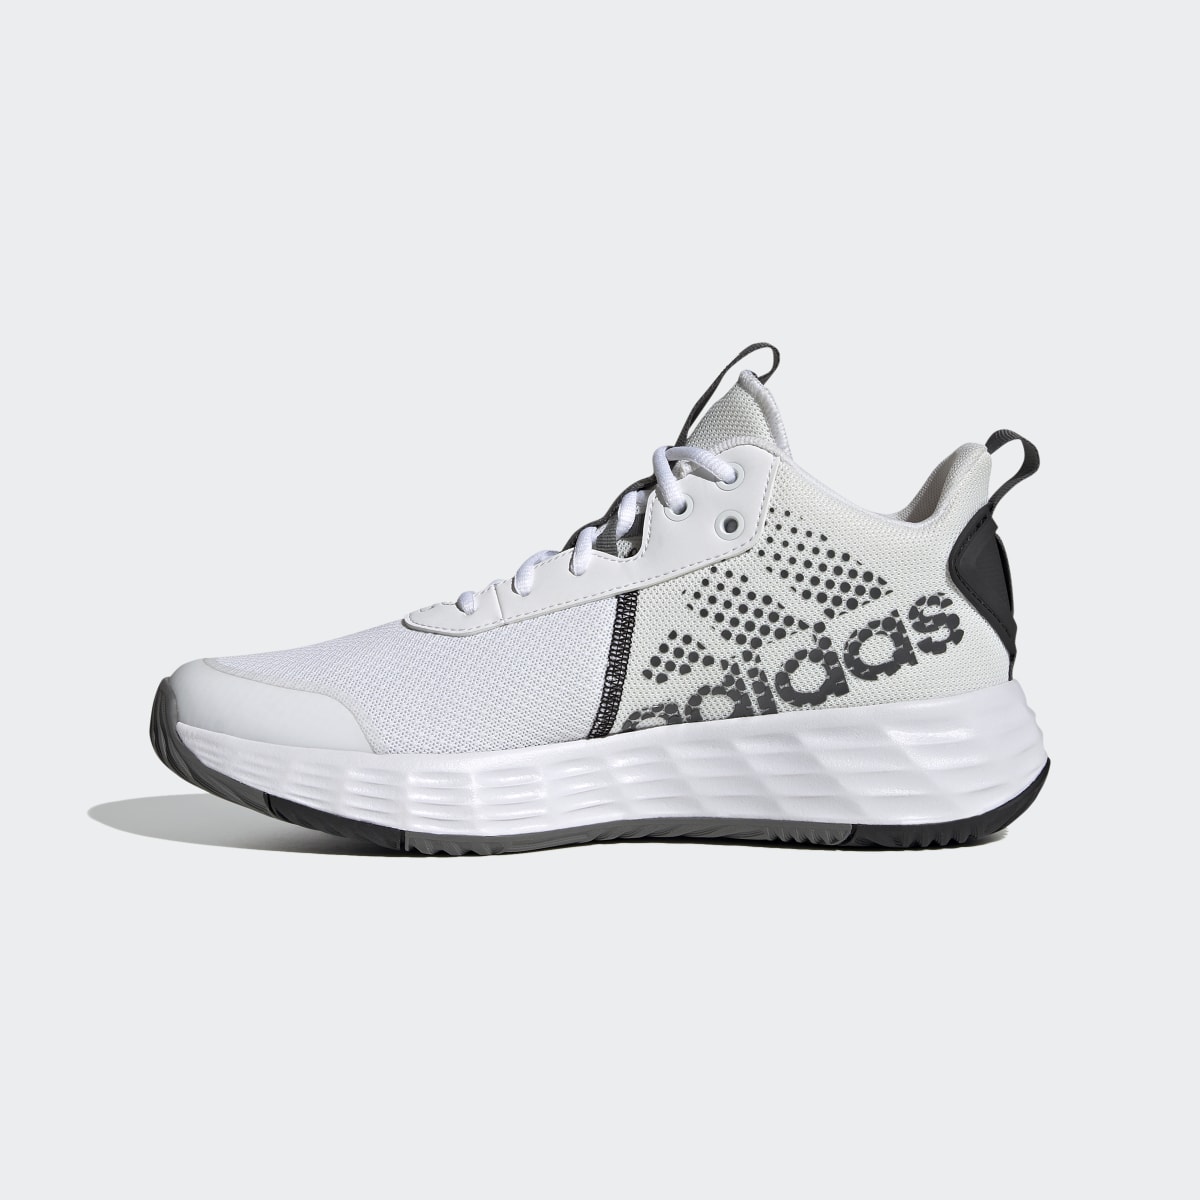 Adidas Ownthegame Shoes. 7